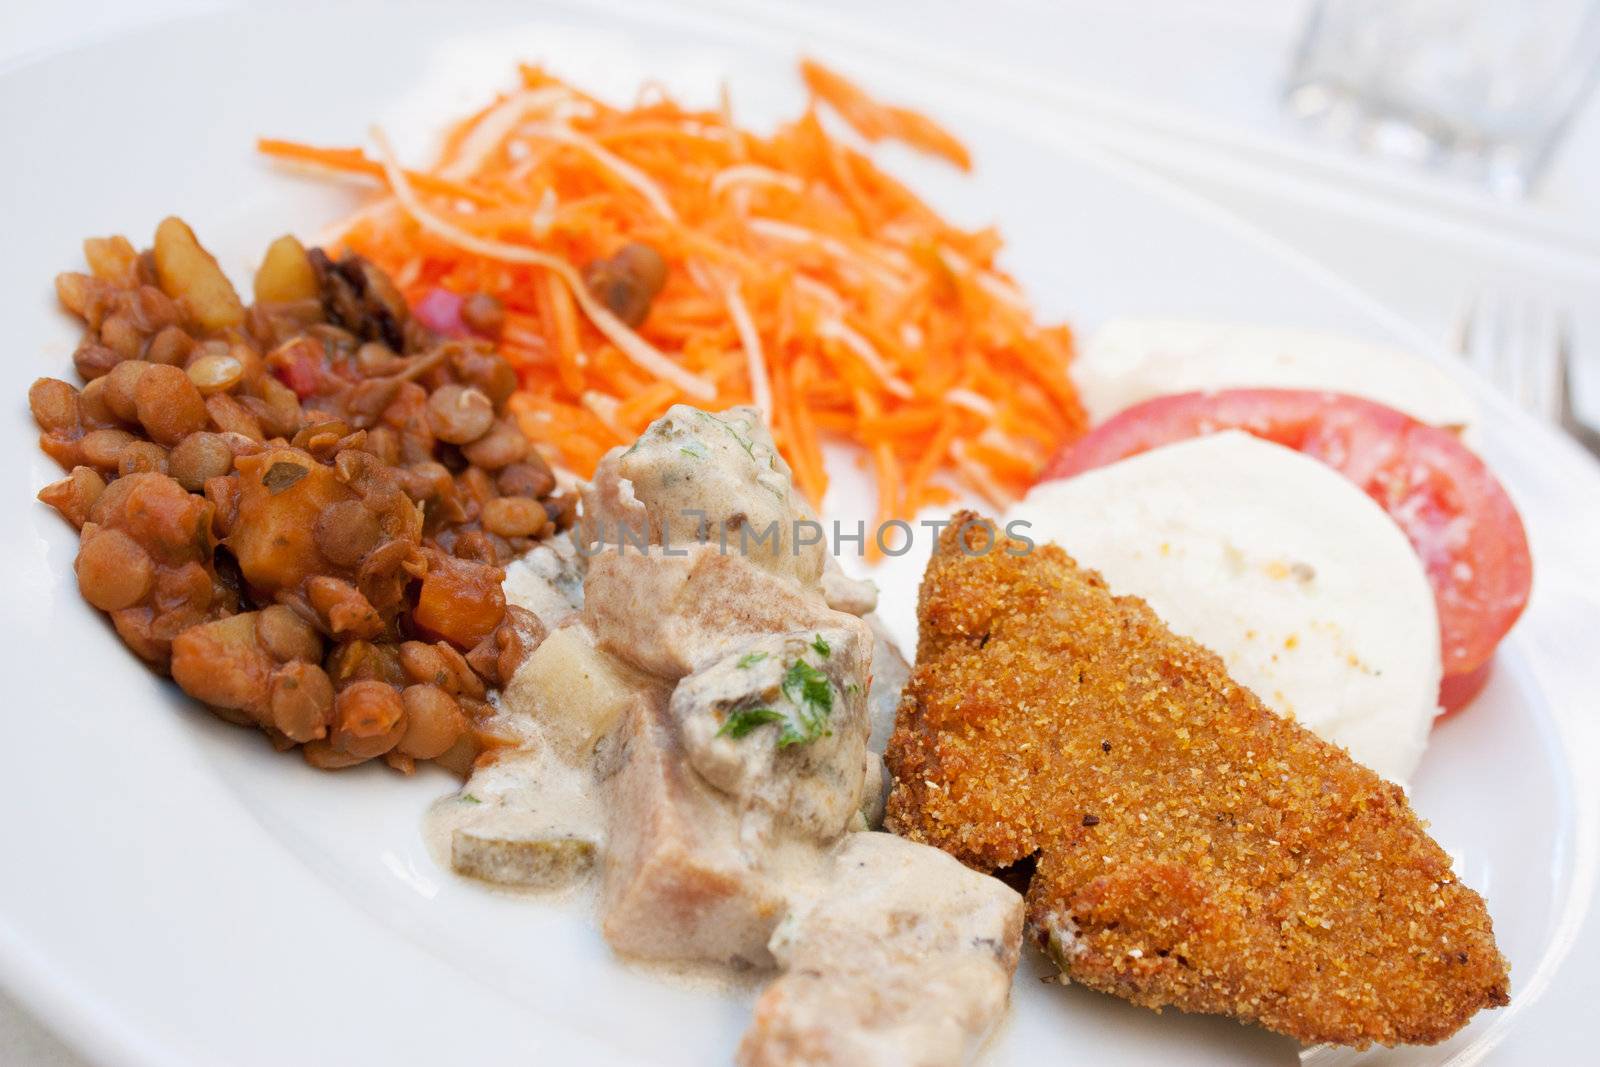 A healthy vegetarian dish, breaded soya and other vegetables